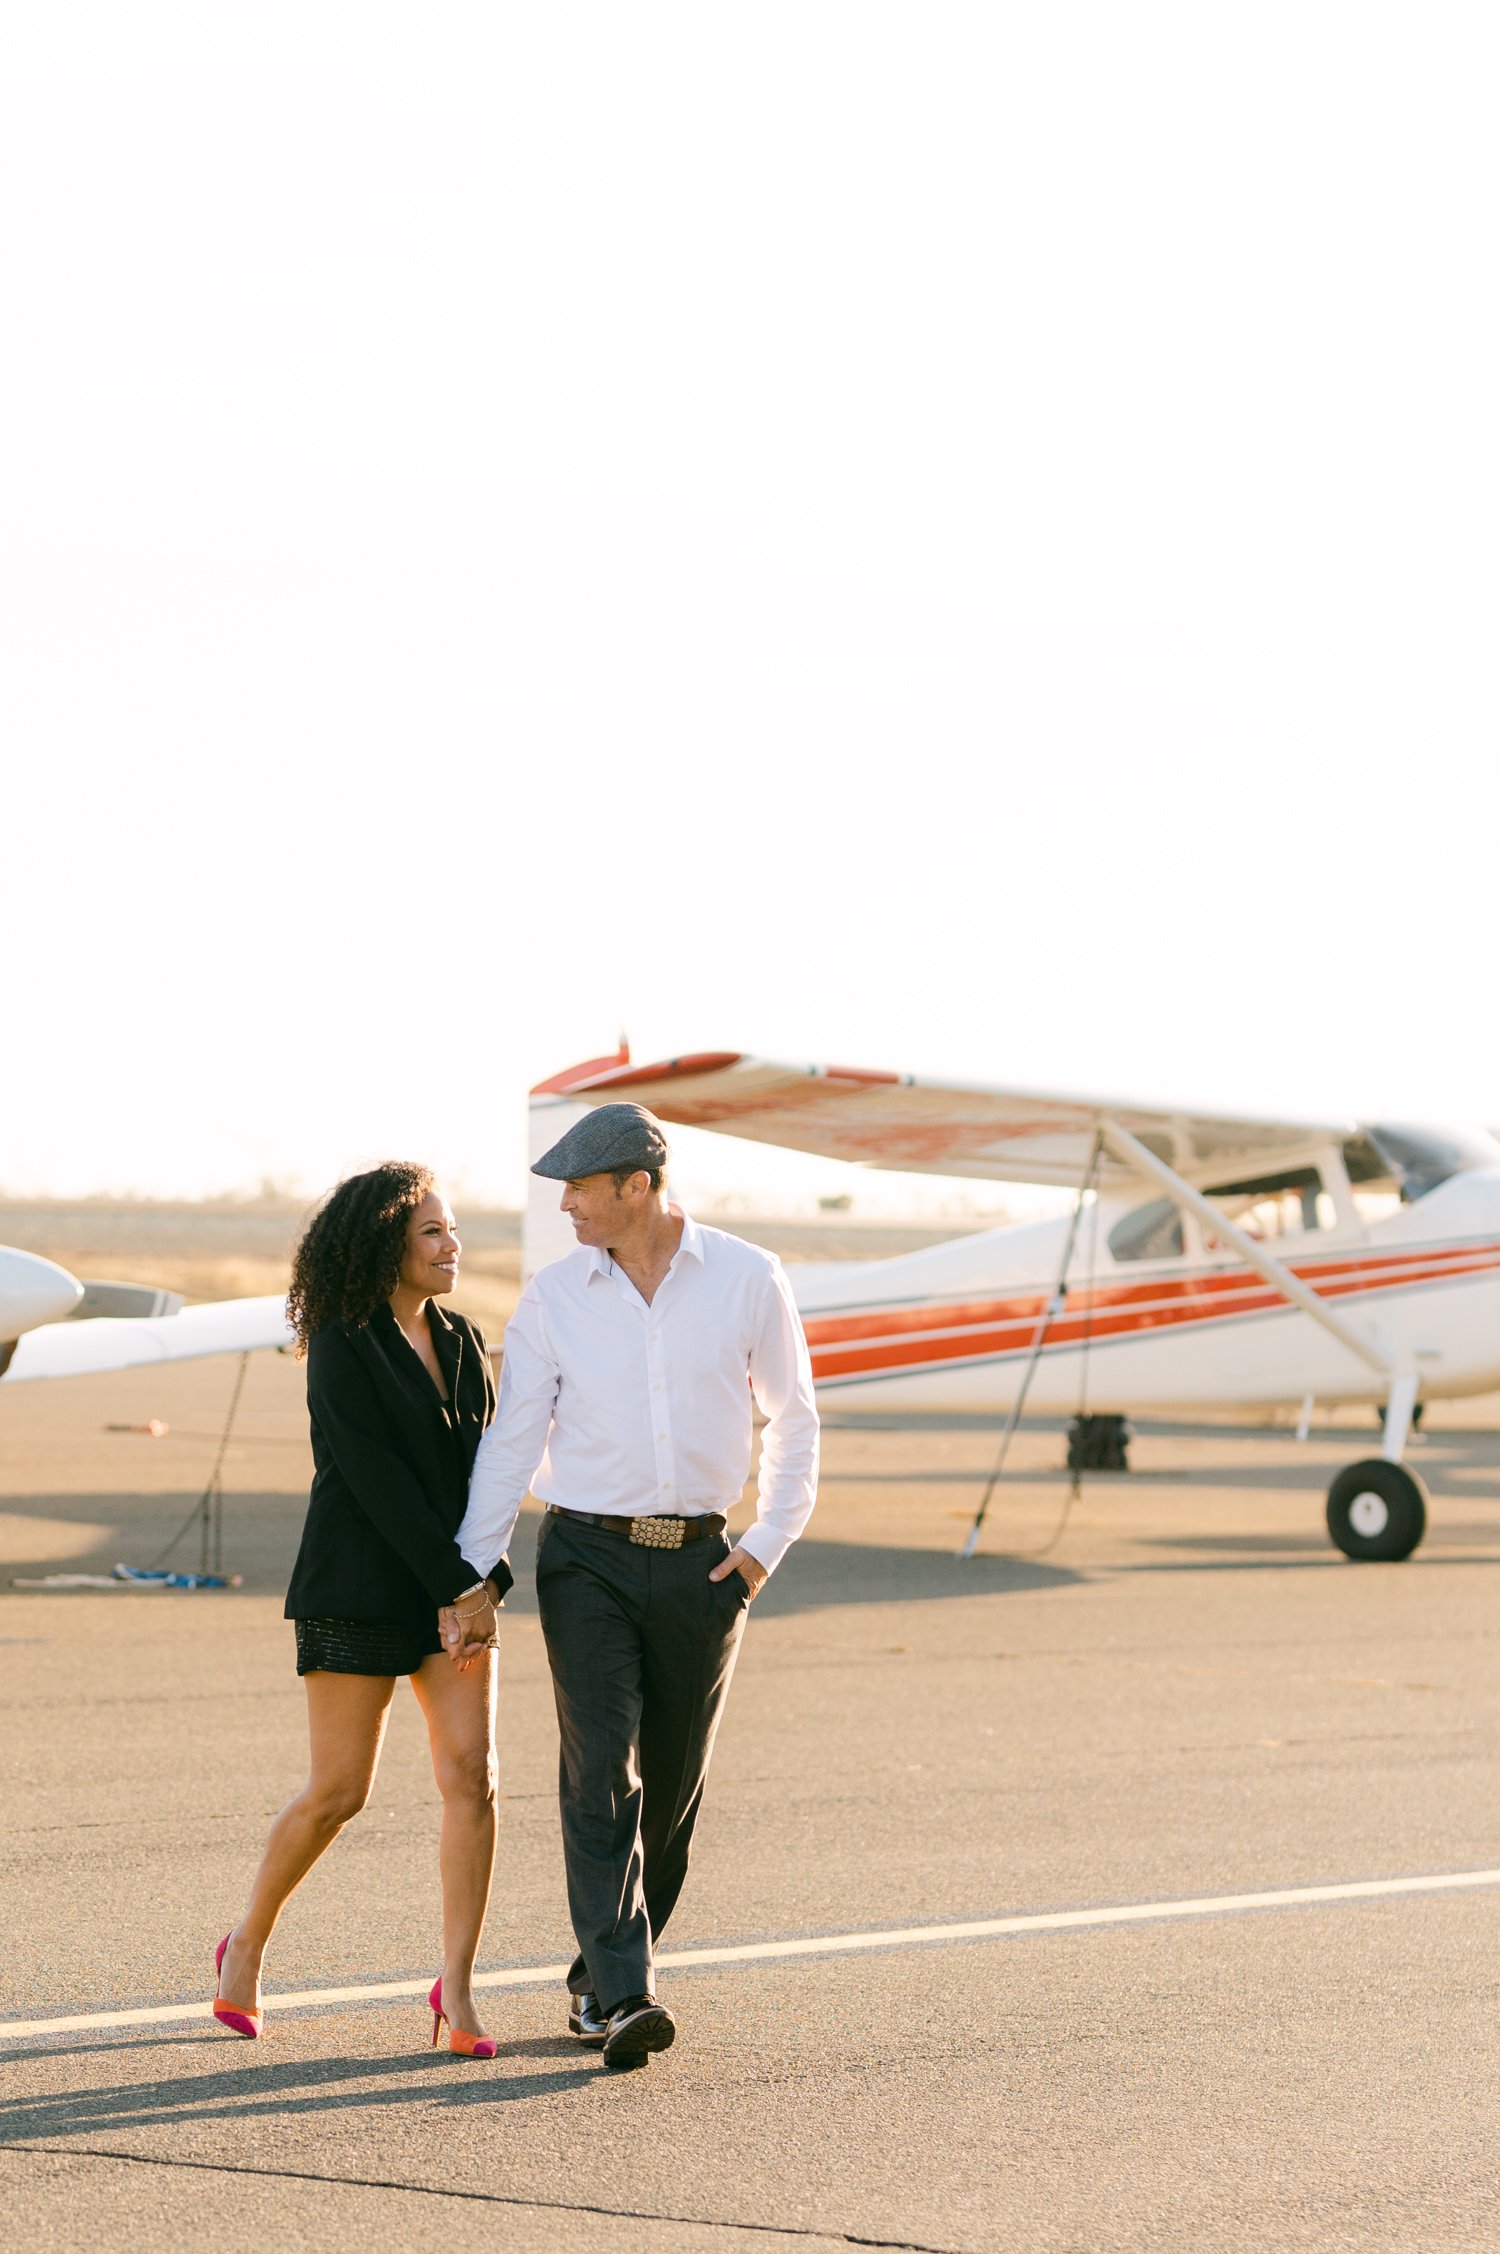 Airport photoshoot, photo of a couple walking alongside a lot of planes